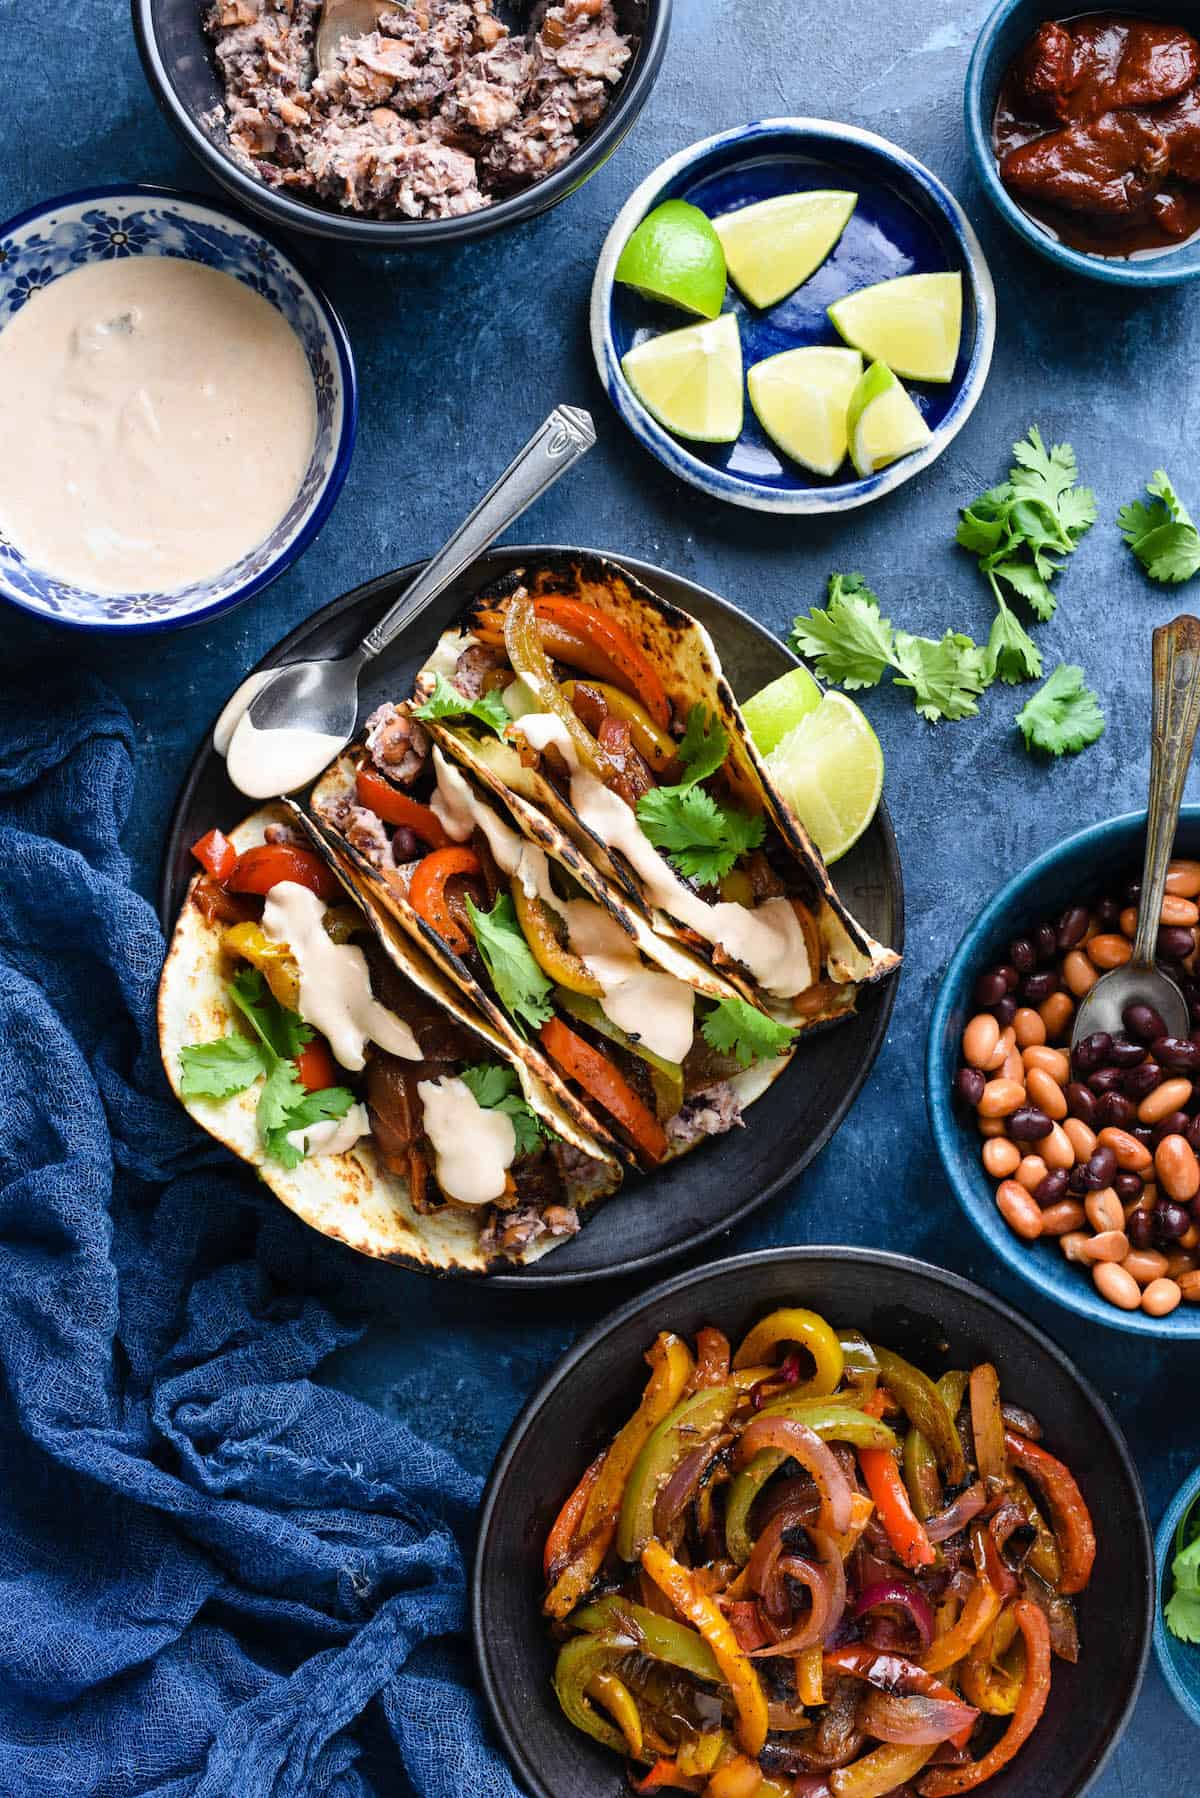 Overhead photo of plate of vegetarian fajijtas, along with bowls of creamy chipotle sauce, mashed beans, lime wedges, chipotles in adobo sauce, whole black beans and pinto beans, and cooked fajita vegetables.